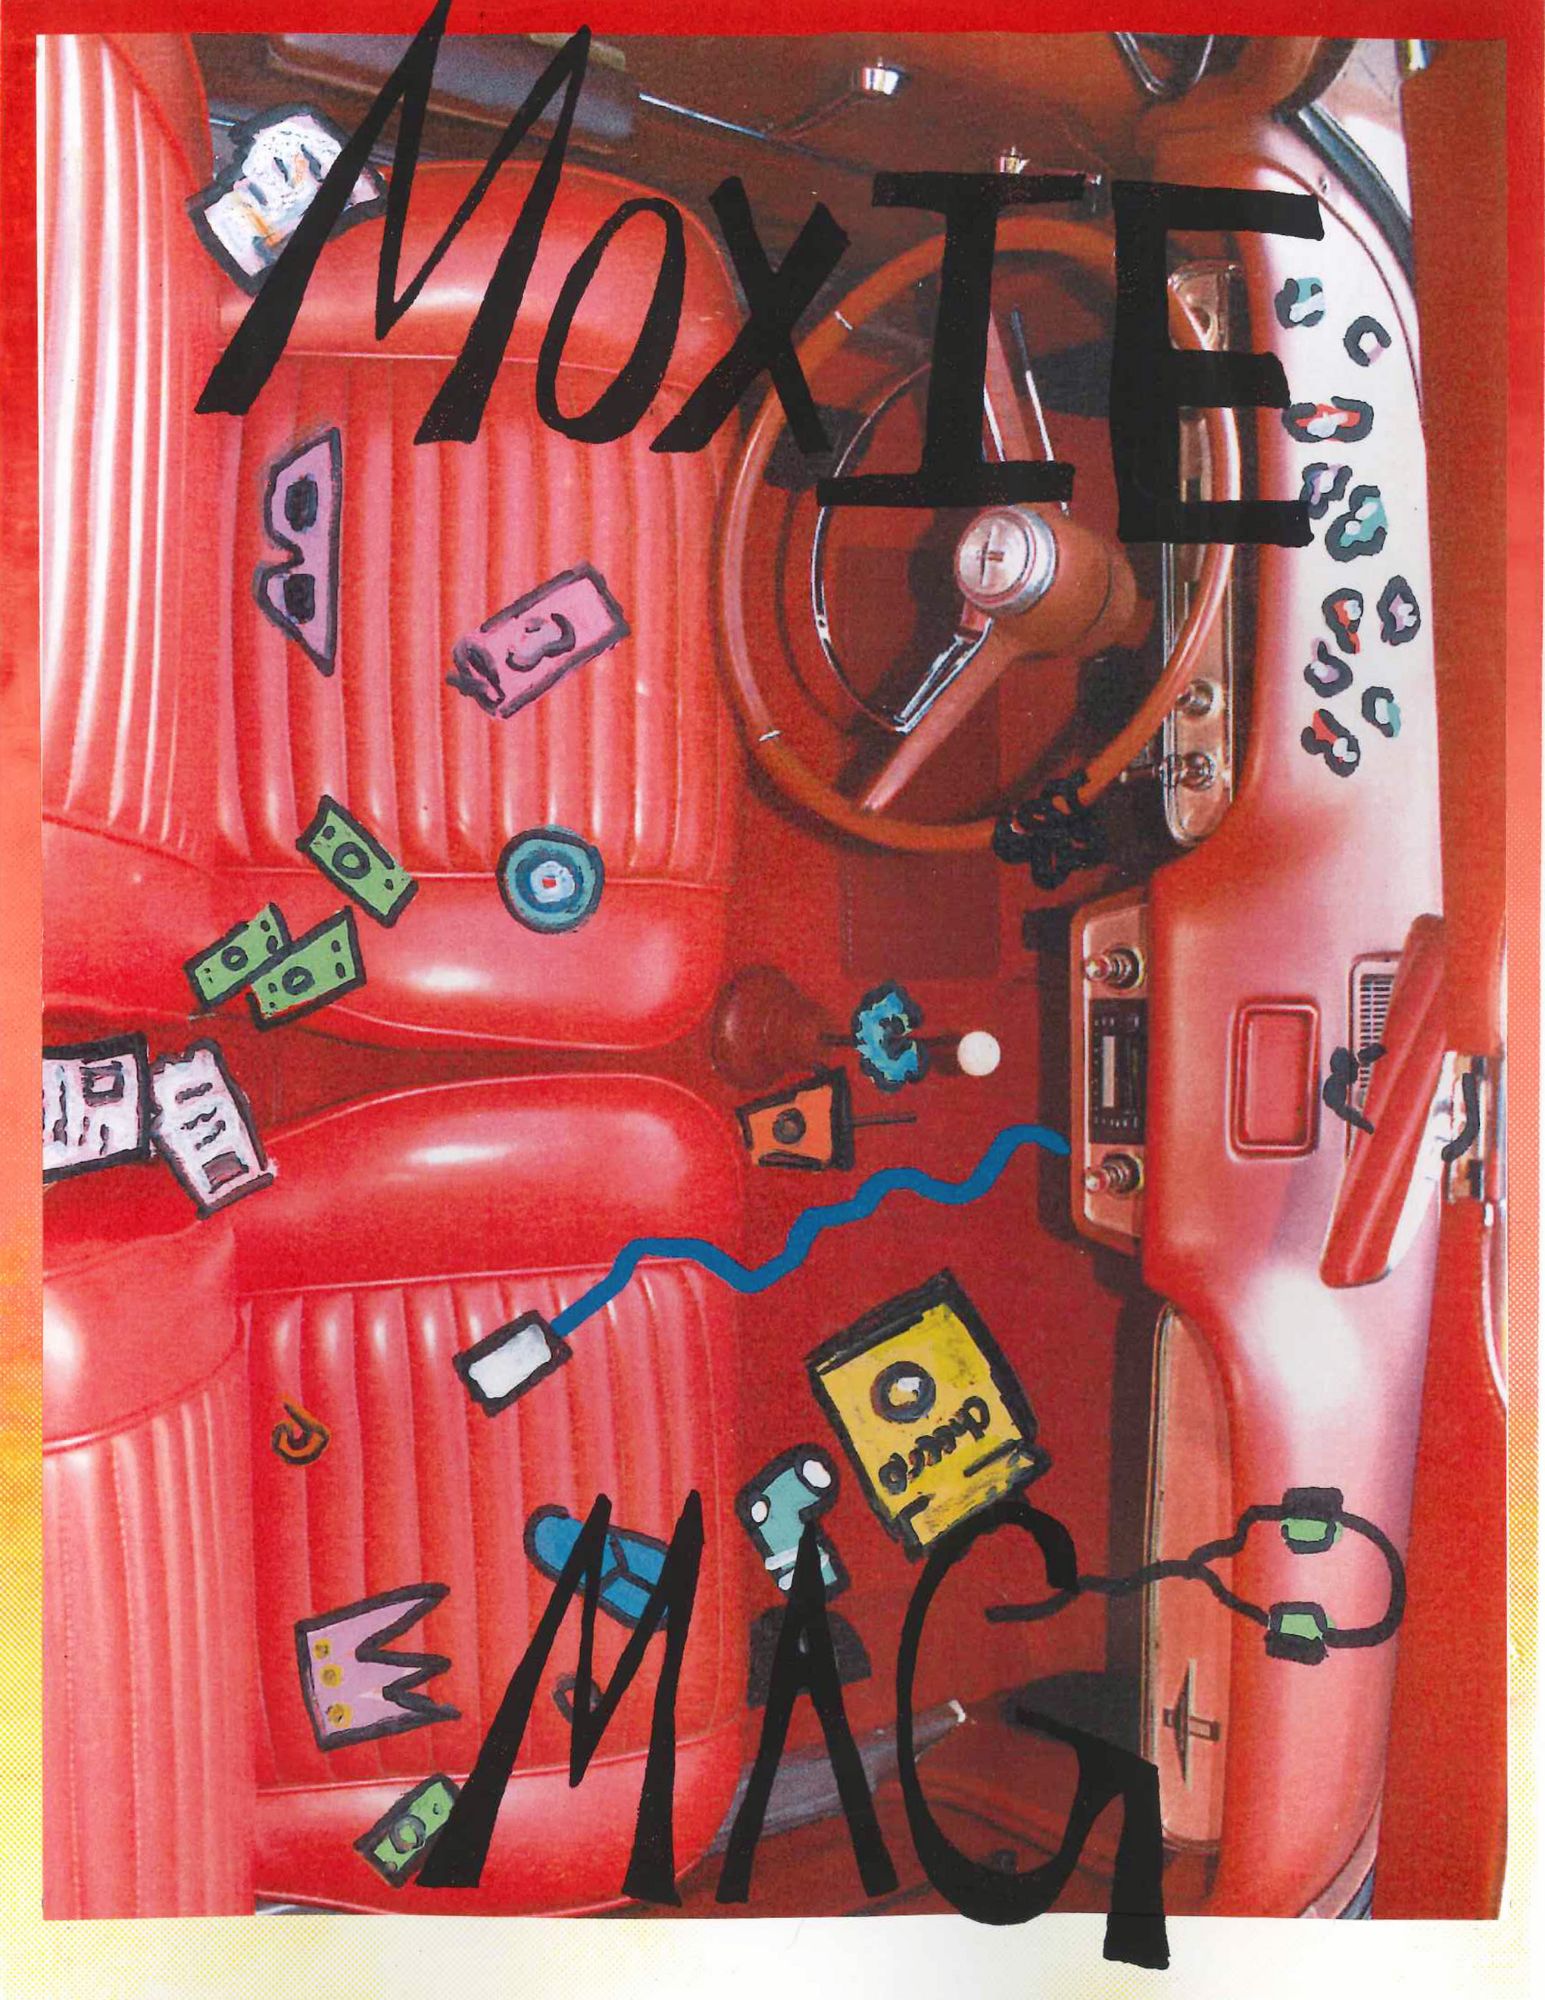 Cover of a magazine that features a bird's eye view of a car with red interior. Text overlay reads, "Moxie Mag".